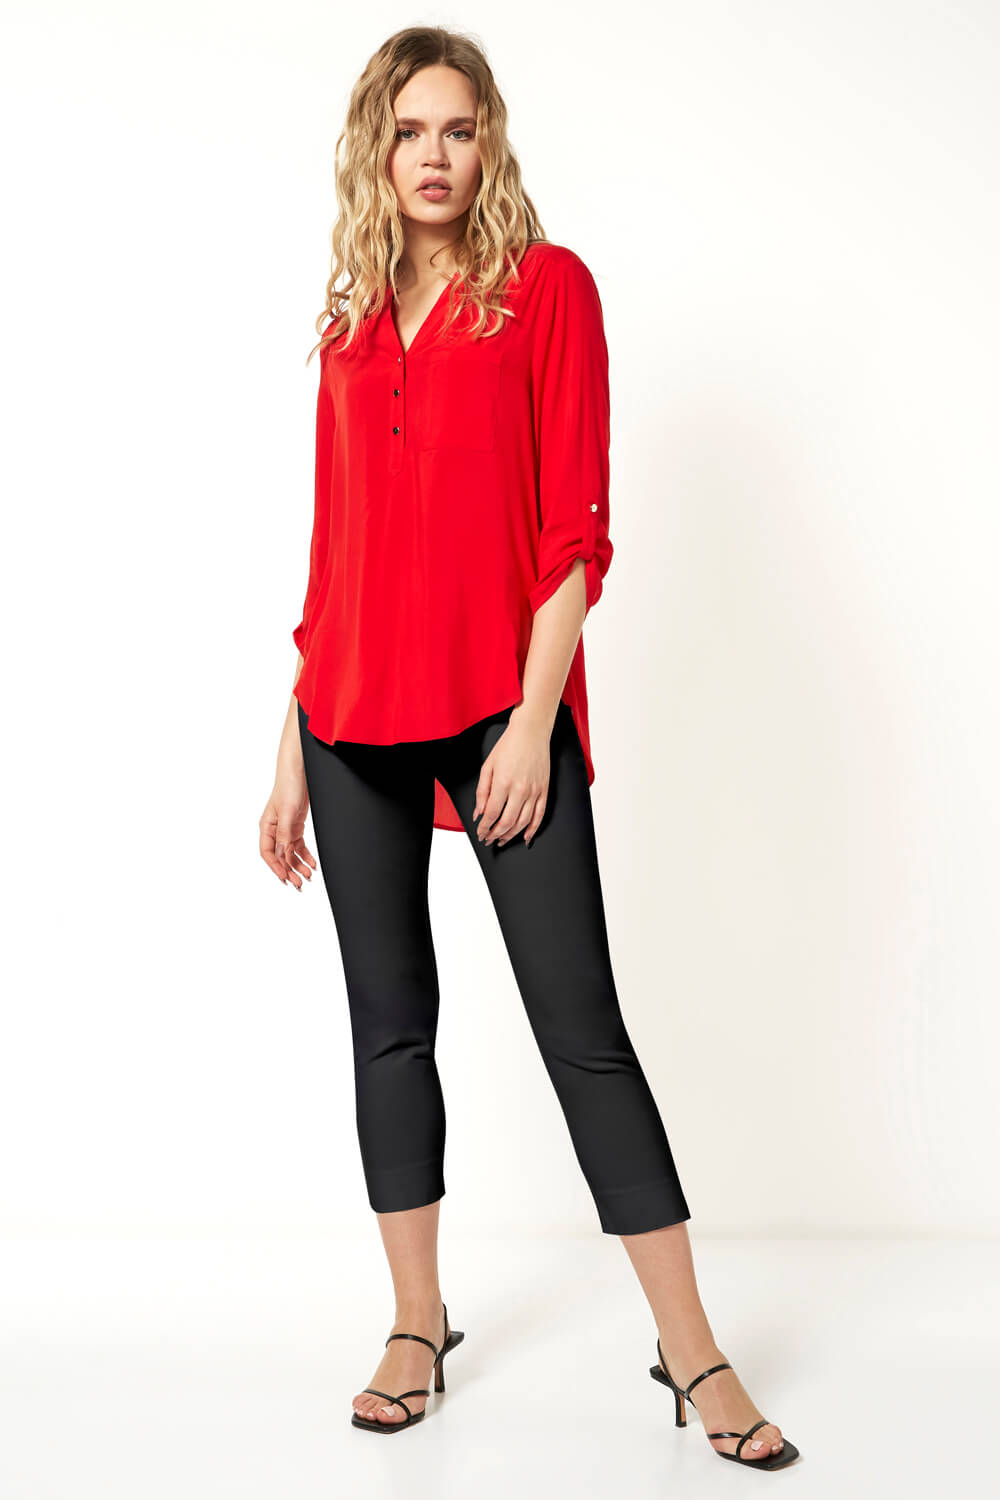 Notch Neck Button Front Top in Red - Roman Originals UK